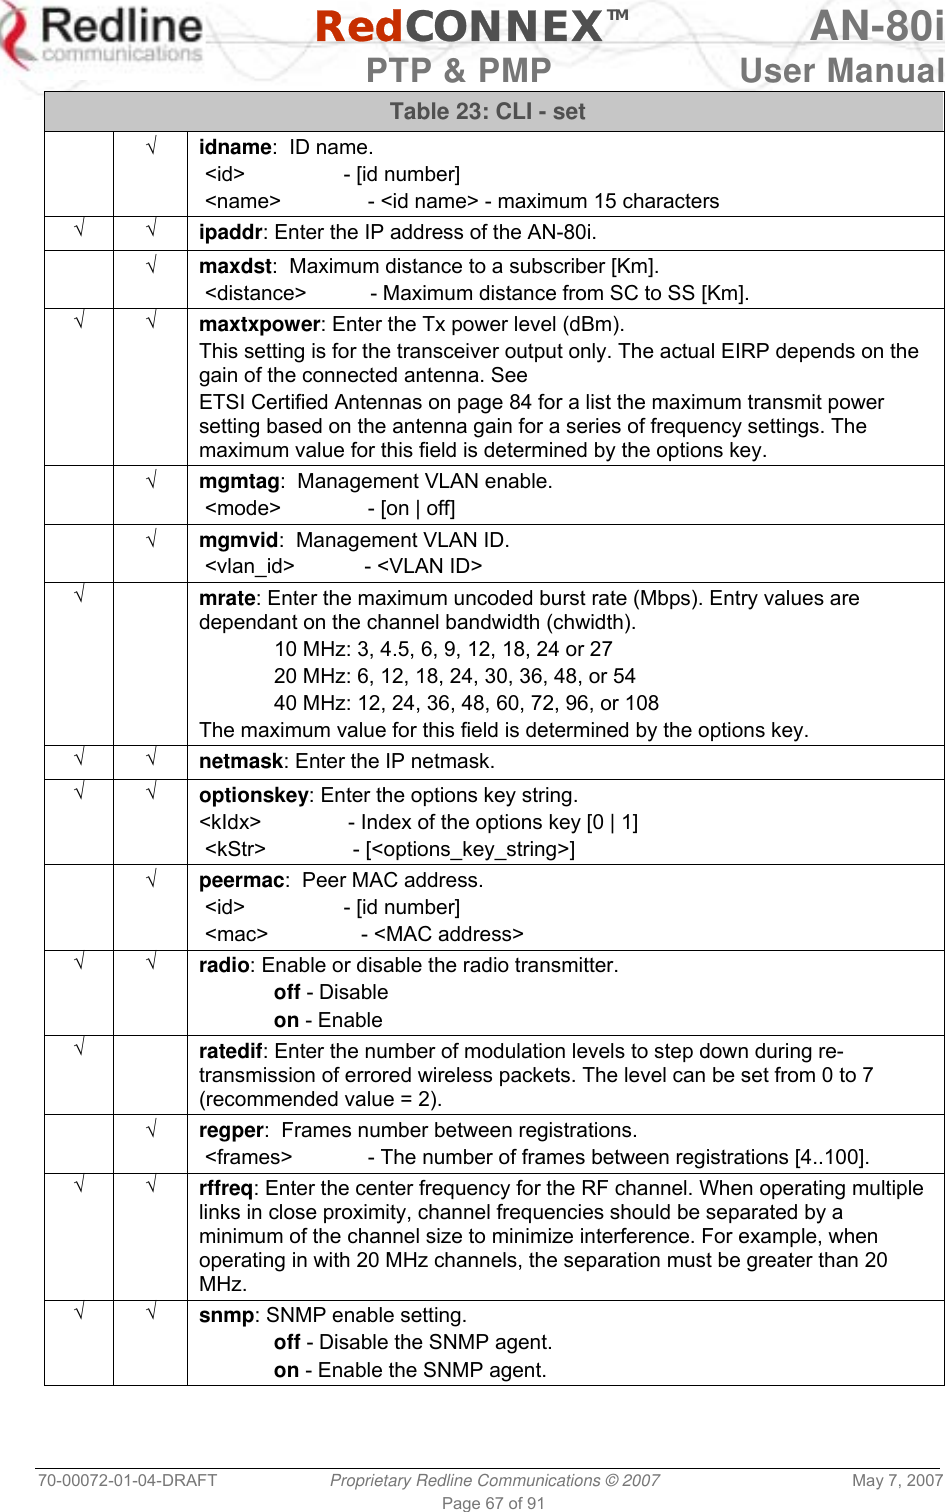   RedCONNEXTM AN-80i   PTP &amp; PMP  User Manual 70-00072-01-04-DRAFT  Proprietary Redline Communications © 2007  May 7, 2007 Page 67 of 91 Table 23: CLI - set  √ idname:  ID name.  &lt;id&gt;                 - [id number]  &lt;name&gt;               - &lt;id name&gt; - maximum 15 characters √ √ ipaddr: Enter the IP address of the AN-80i.  √ maxdst:  Maximum distance to a subscriber [Km].  &lt;distance&gt;           - Maximum distance from SC to SS [Km]. √ √ maxtxpower: Enter the Tx power level (dBm). This setting is for the transceiver output only. The actual EIRP depends on the gain of the connected antenna. See  ETSI Certified Antennas on page 84 for a list the maximum transmit power setting based on the antenna gain for a series of frequency settings. The maximum value for this field is determined by the options key.  √ mgmtag:  Management VLAN enable.  &lt;mode&gt;               - [on | off]  √ mgmvid:  Management VLAN ID.  &lt;vlan_id&gt;            - &lt;VLAN ID&gt; √  mrate: Enter the maximum uncoded burst rate (Mbps). Entry values are dependant on the channel bandwidth (chwidth).  10 MHz: 3, 4.5, 6, 9, 12, 18, 24 or 27   20 MHz: 6, 12, 18, 24, 30, 36, 48, or 54   40 MHz: 12, 24, 36, 48, 60, 72, 96, or 108  The maximum value for this field is determined by the options key. √ √ netmask: Enter the IP netmask. √ √ optionskey: Enter the options key string. &lt;kIdx&gt;               - Index of the options key [0 | 1]  &lt;kStr&gt;               - [&lt;options_key_string&gt;]  √ peermac:  Peer MAC address.  &lt;id&gt;                 - [id number]  &lt;mac&gt;                - &lt;MAC address&gt; √ √ radio: Enable or disable the radio transmitter.  off - Disable  on - Enable √  ratedif: Enter the number of modulation levels to step down during re-transmission of errored wireless packets. The level can be set from 0 to 7 (recommended value = 2).  √ regper:  Frames number between registrations.  &lt;frames&gt;             - The number of frames between registrations [4..100]. √ √ rffreq: Enter the center frequency for the RF channel. When operating multiple links in close proximity, channel frequencies should be separated by a minimum of the channel size to minimize interference. For example, when operating in with 20 MHz channels, the separation must be greater than 20 MHz. √ √ snmp: SNMP enable setting.  off - Disable the SNMP agent.  on - Enable the SNMP agent. 